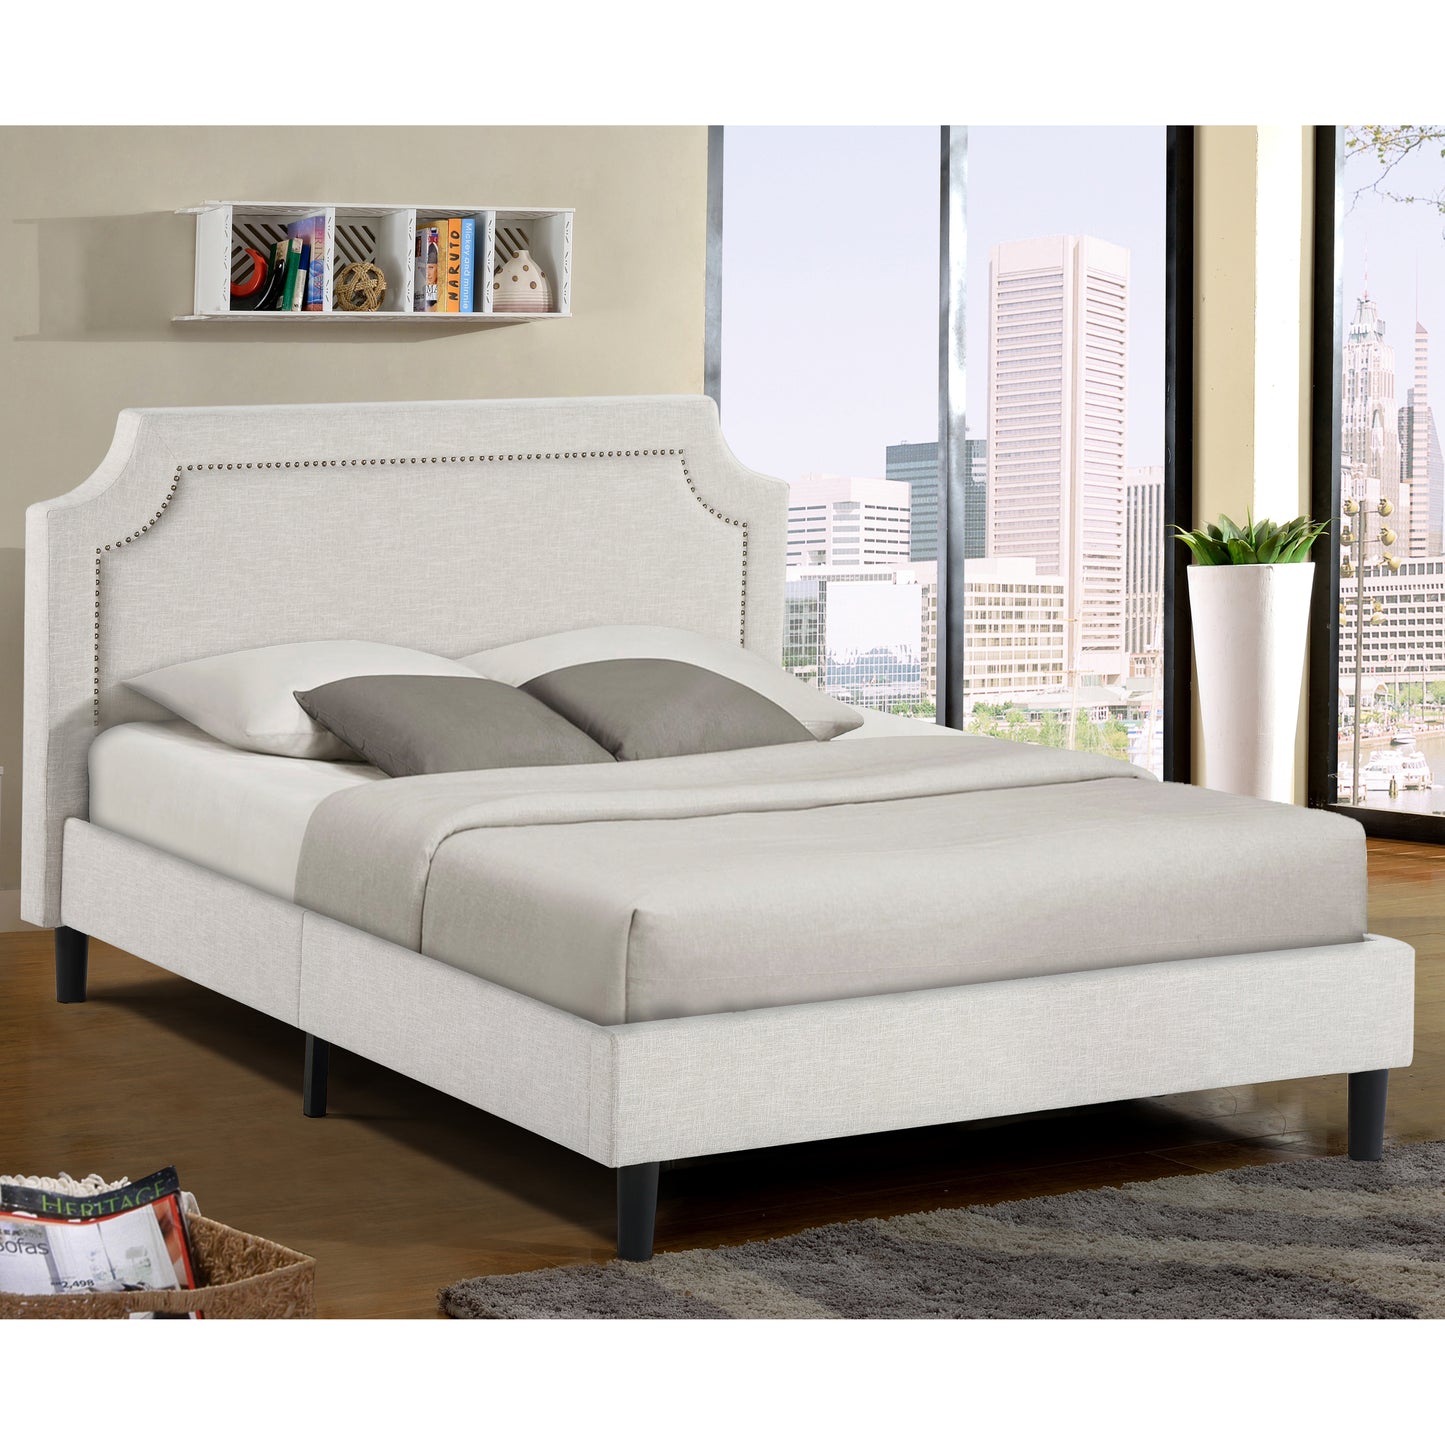 Alison Beige Upholstered Platform Bed with Nail Head Accent Queen Size